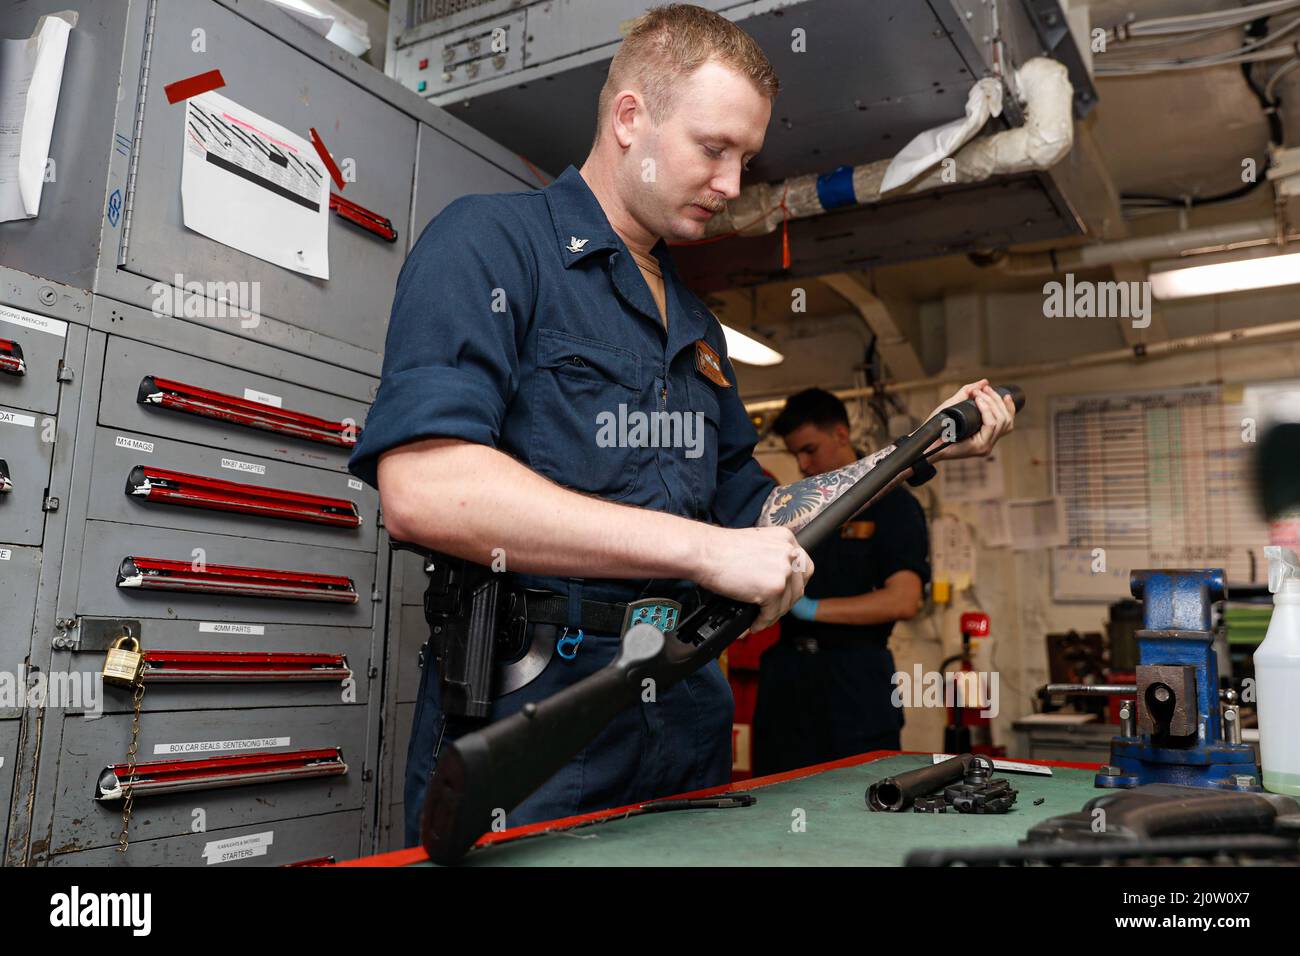 SOUTH CHINA SEA (Jan. 28, 2022) Gunner’s Mate 3rd Class Taylor Green, from Sheperd, Mont., disassembles and reassembles an M500 shotgun in the armory aboard the Nimitz-class aircraft carrier USS Abraham Lincoln (CVN 72). Abraham Lincoln Strike Group is on a scheduled deployment in the U.S. 7th Fleet area of operations to enhance interoperability through alliances and partnerships while serving as a ready-response force in support of a free and open Indo-Pacific region. (U.S. Navy photo by Mass Communication Specialist Seaman Apprentice Jett Morgan) Stock Photo